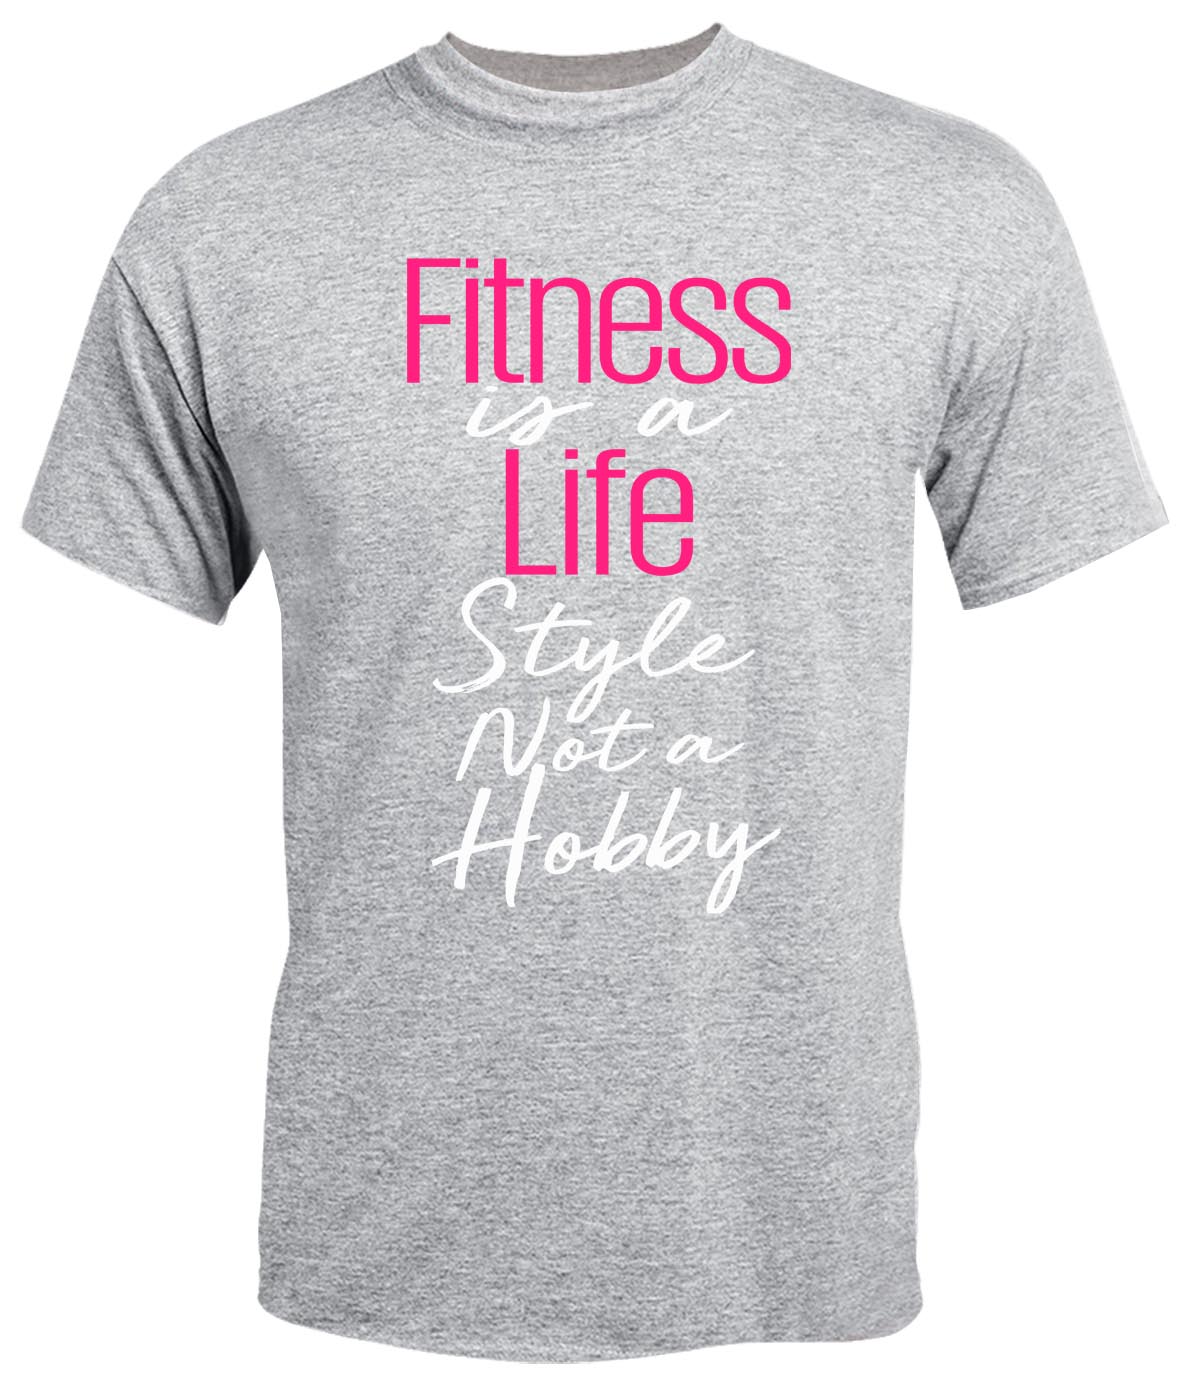 Fitness is a Life Style Not A Hobby